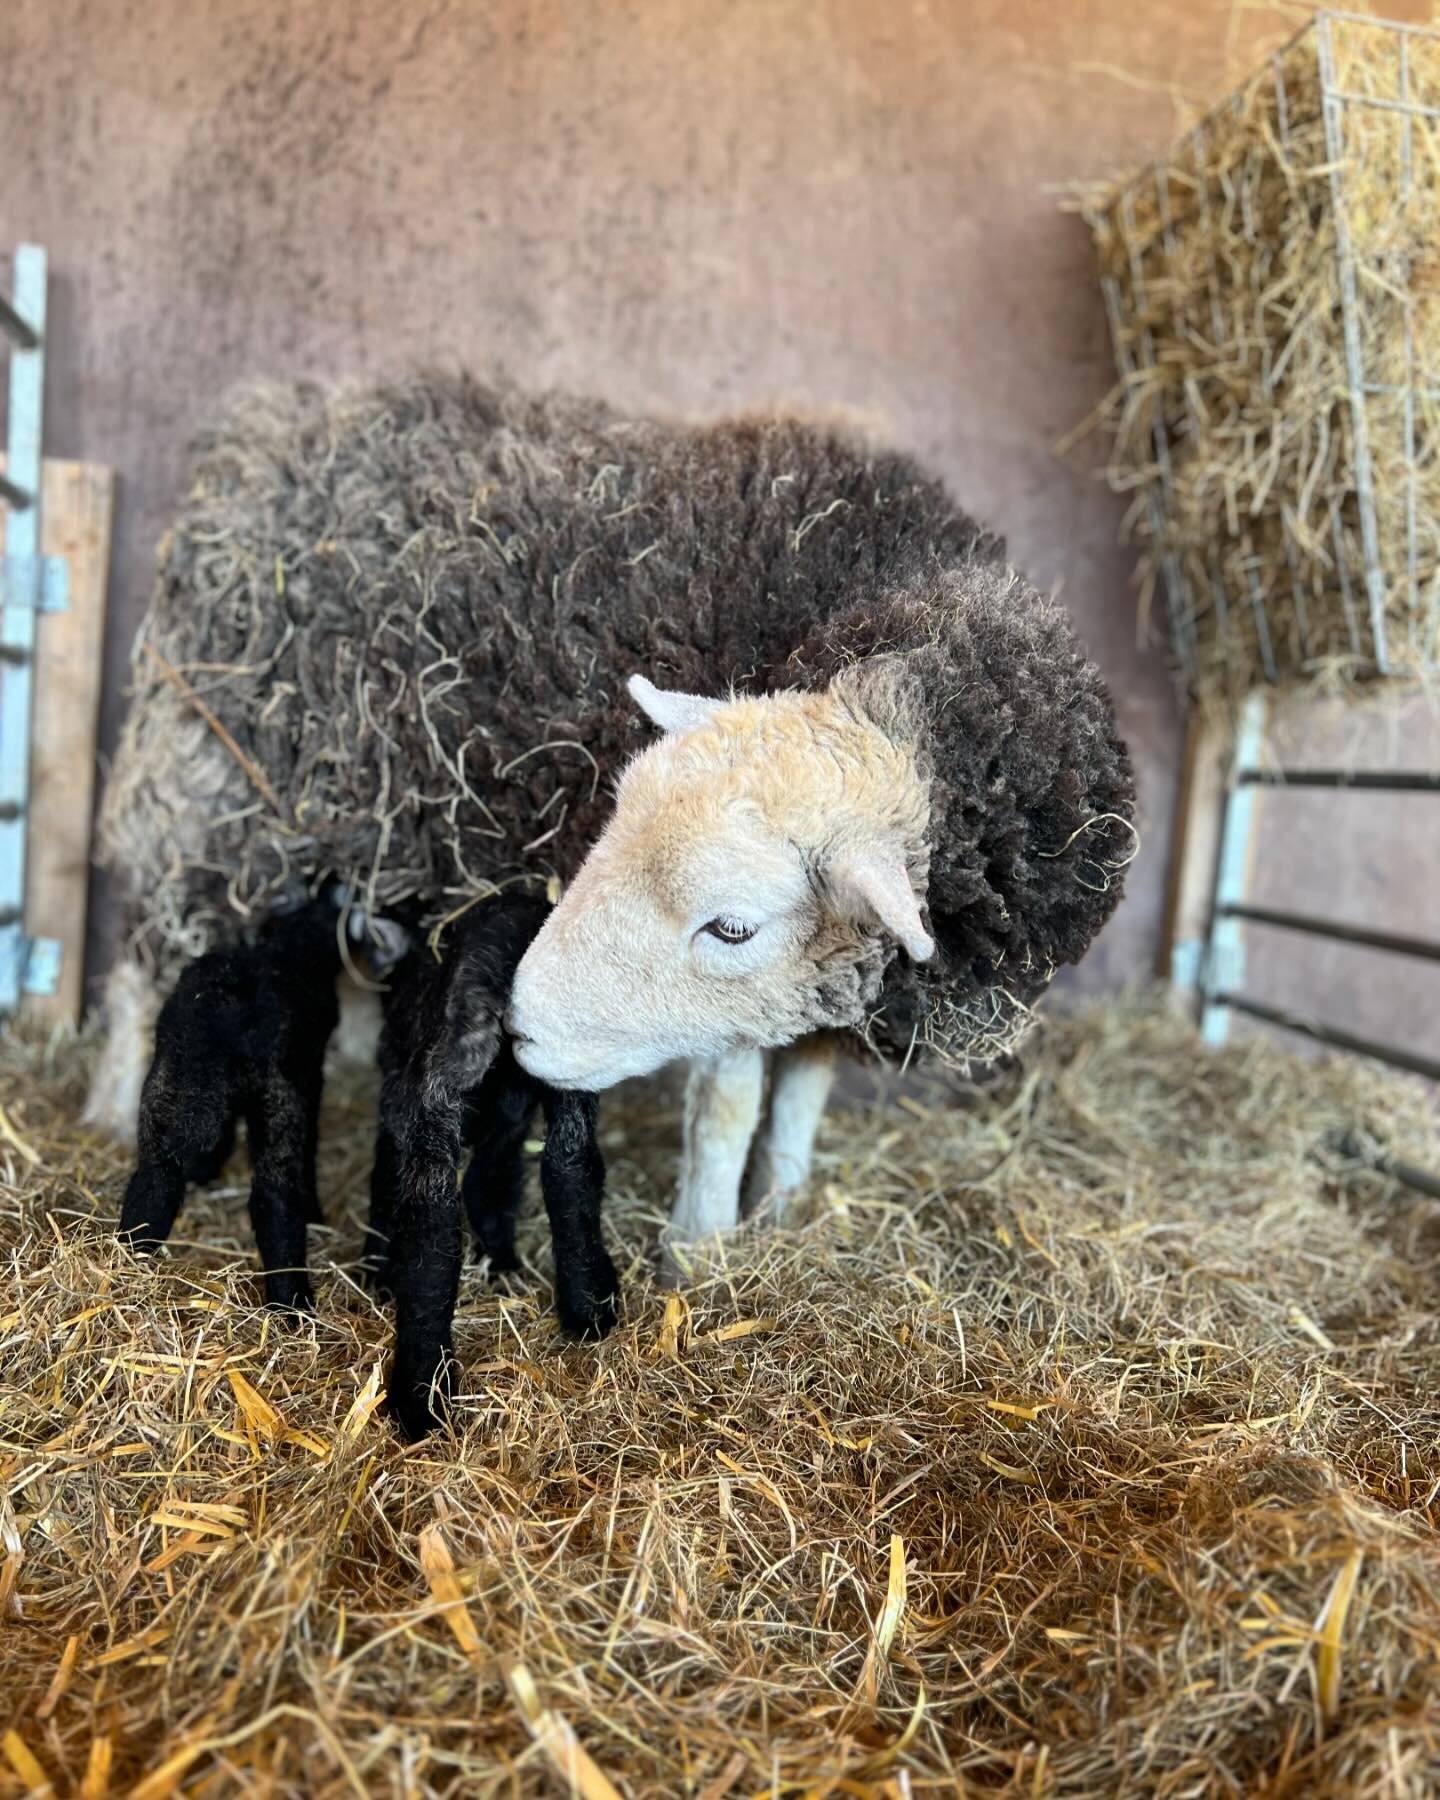 Welcome May, at last the weather is warmer and yesterday my last Herdwick lambed with a pair they are very tiny but perfectly good, looking forward to returning to my office now and planning for the months ahead.